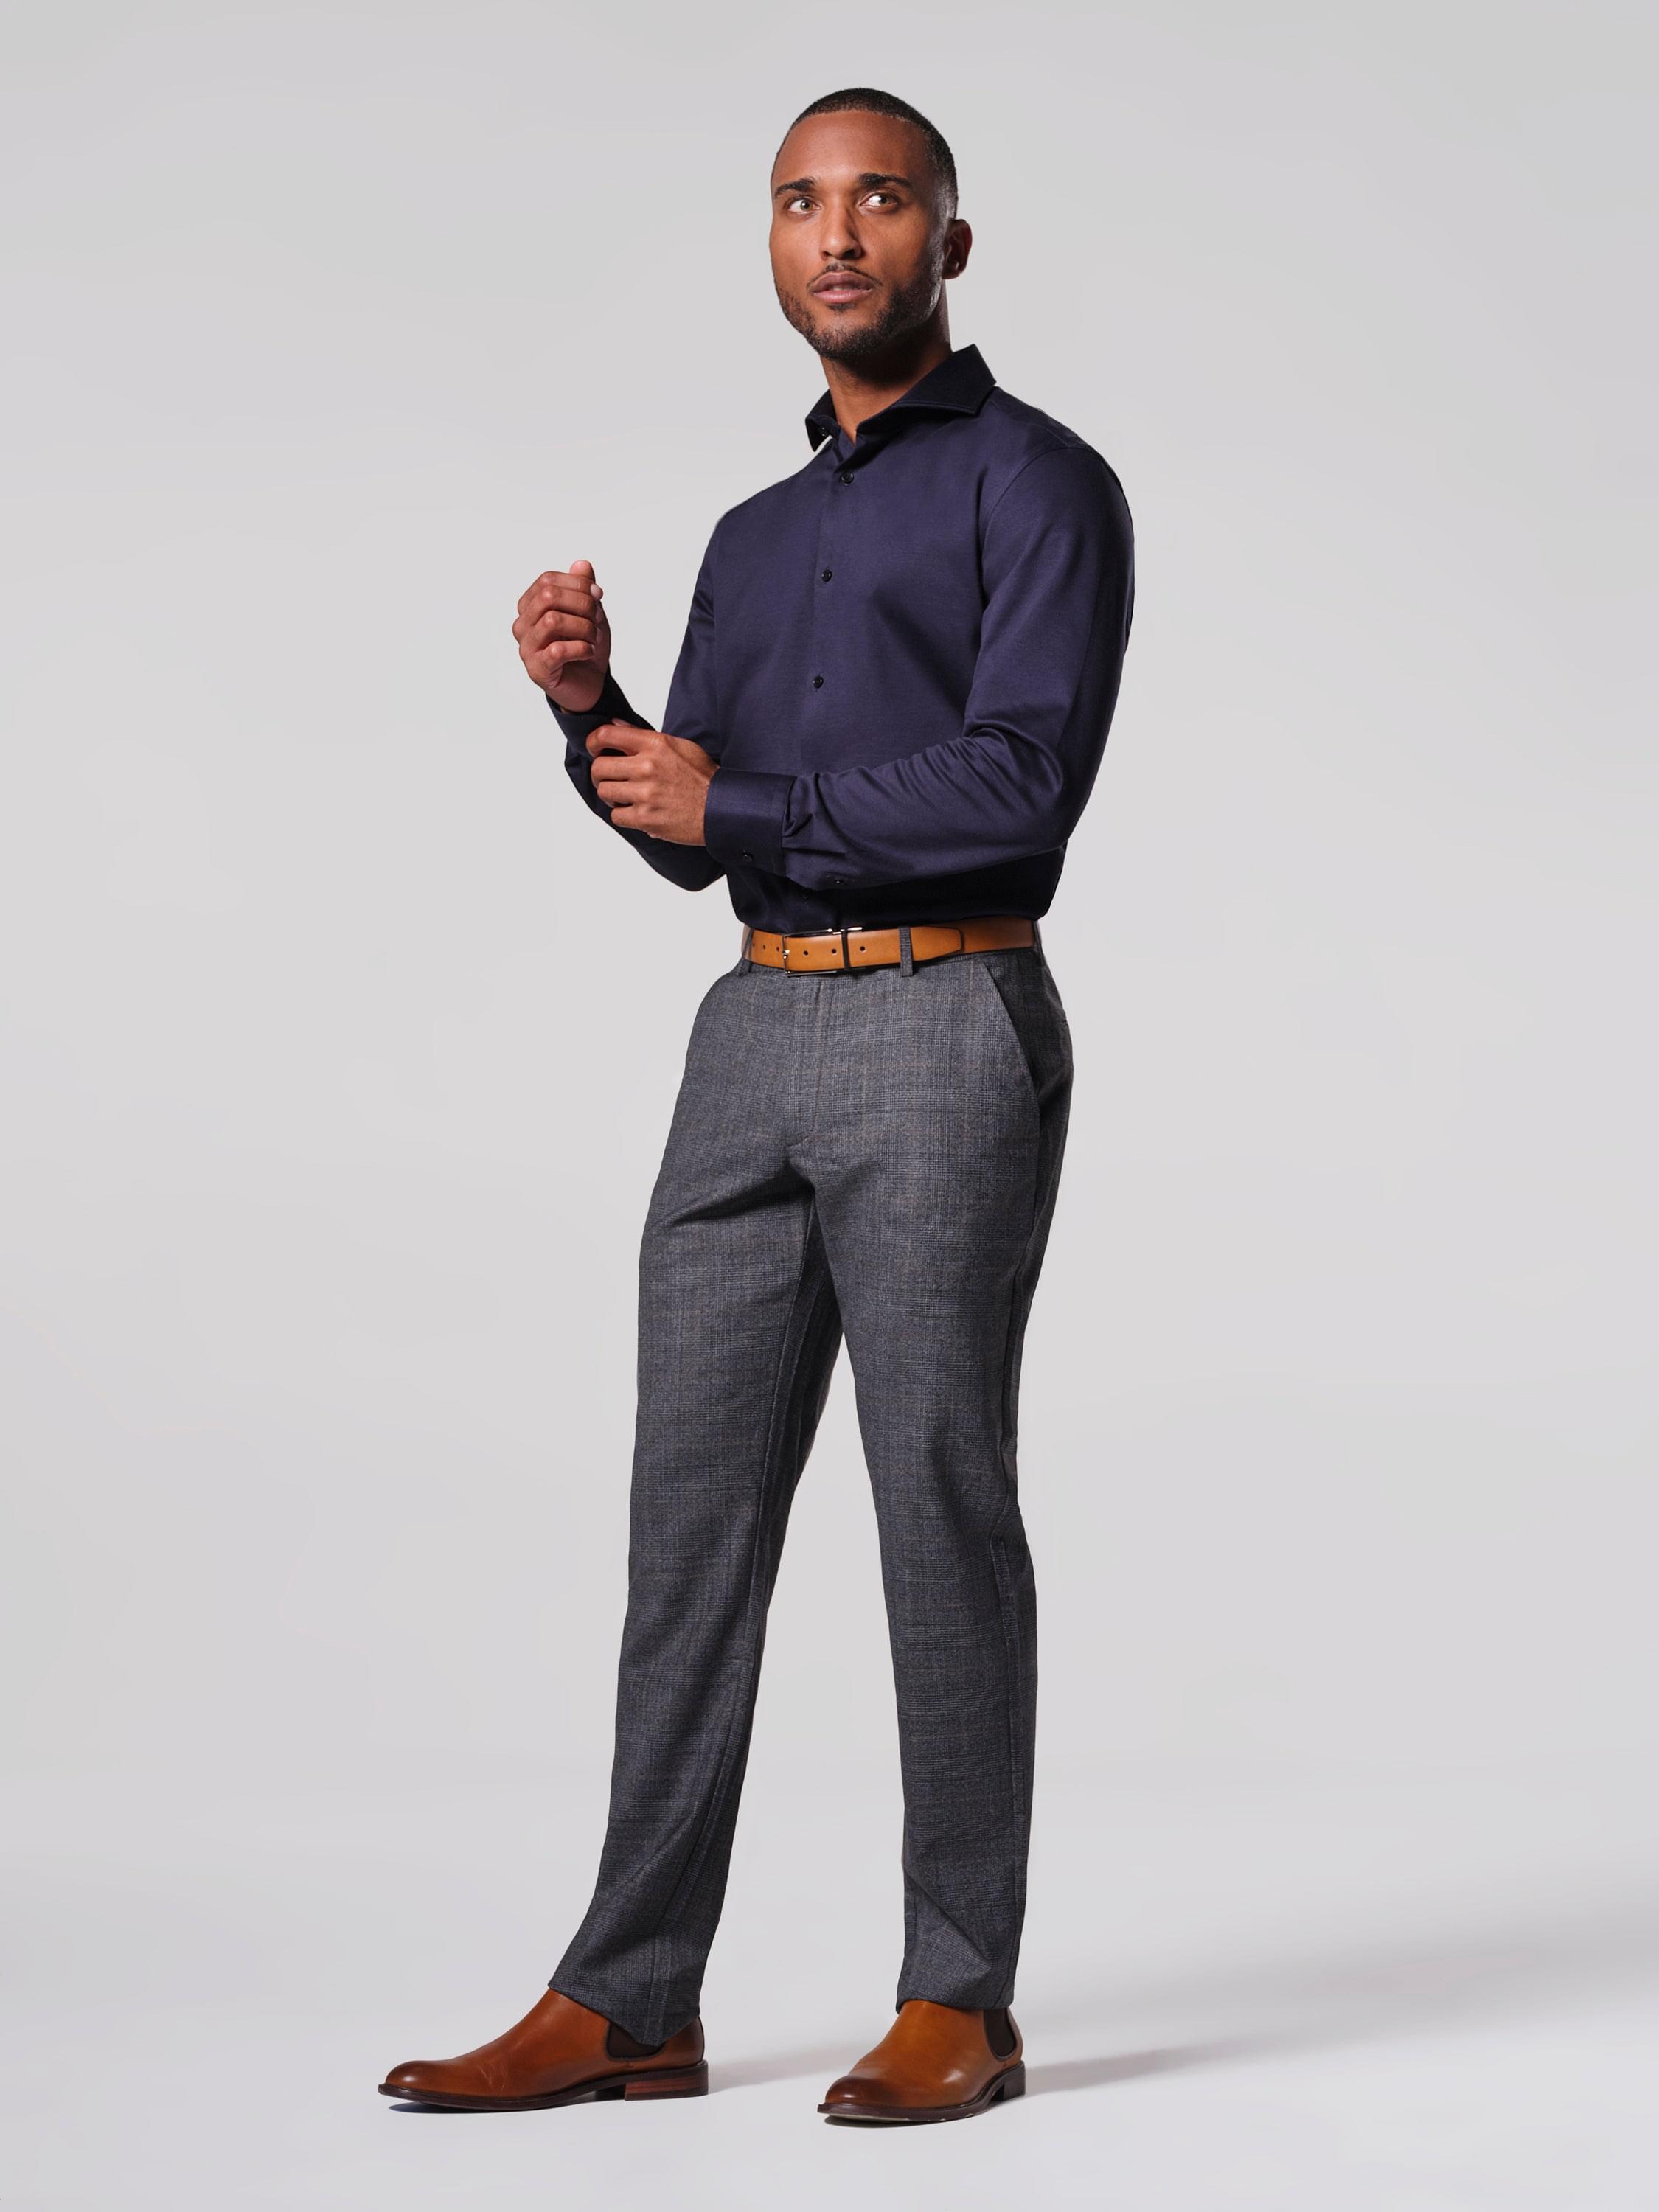 Athletic Fit Stretch Suit Pants - Heathered Grey